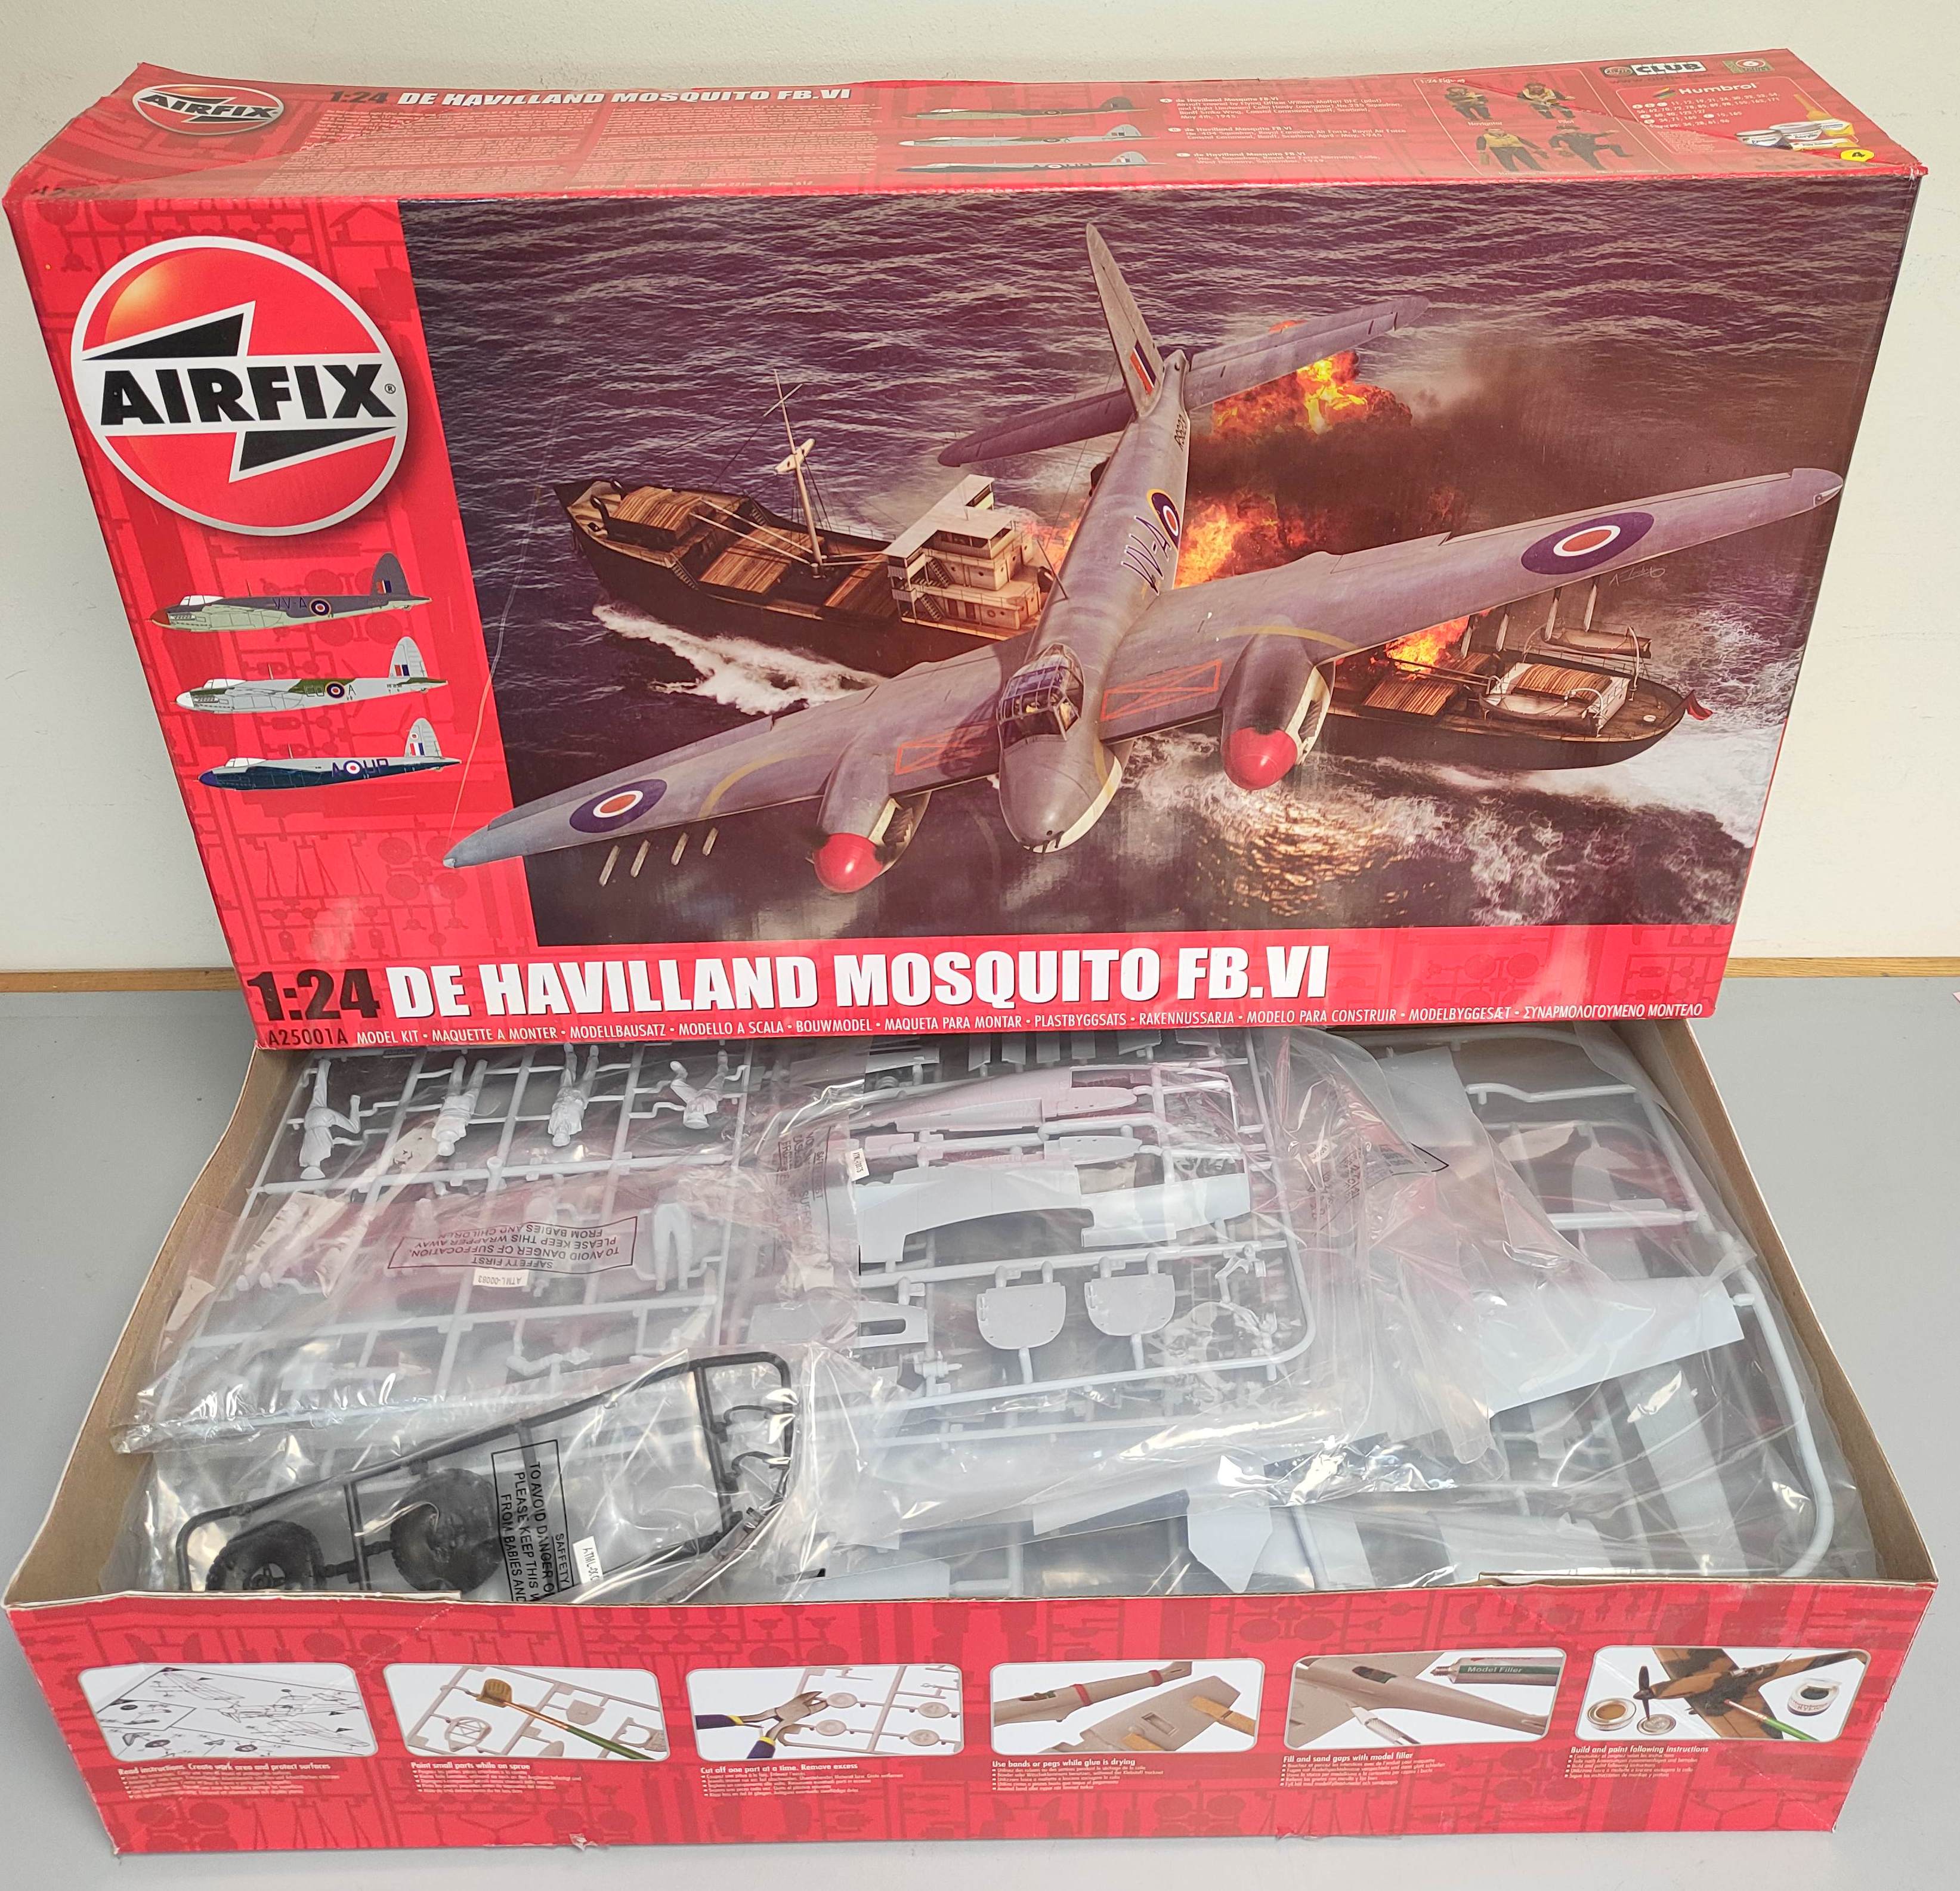 Airfix. Boxed 1:24 scale